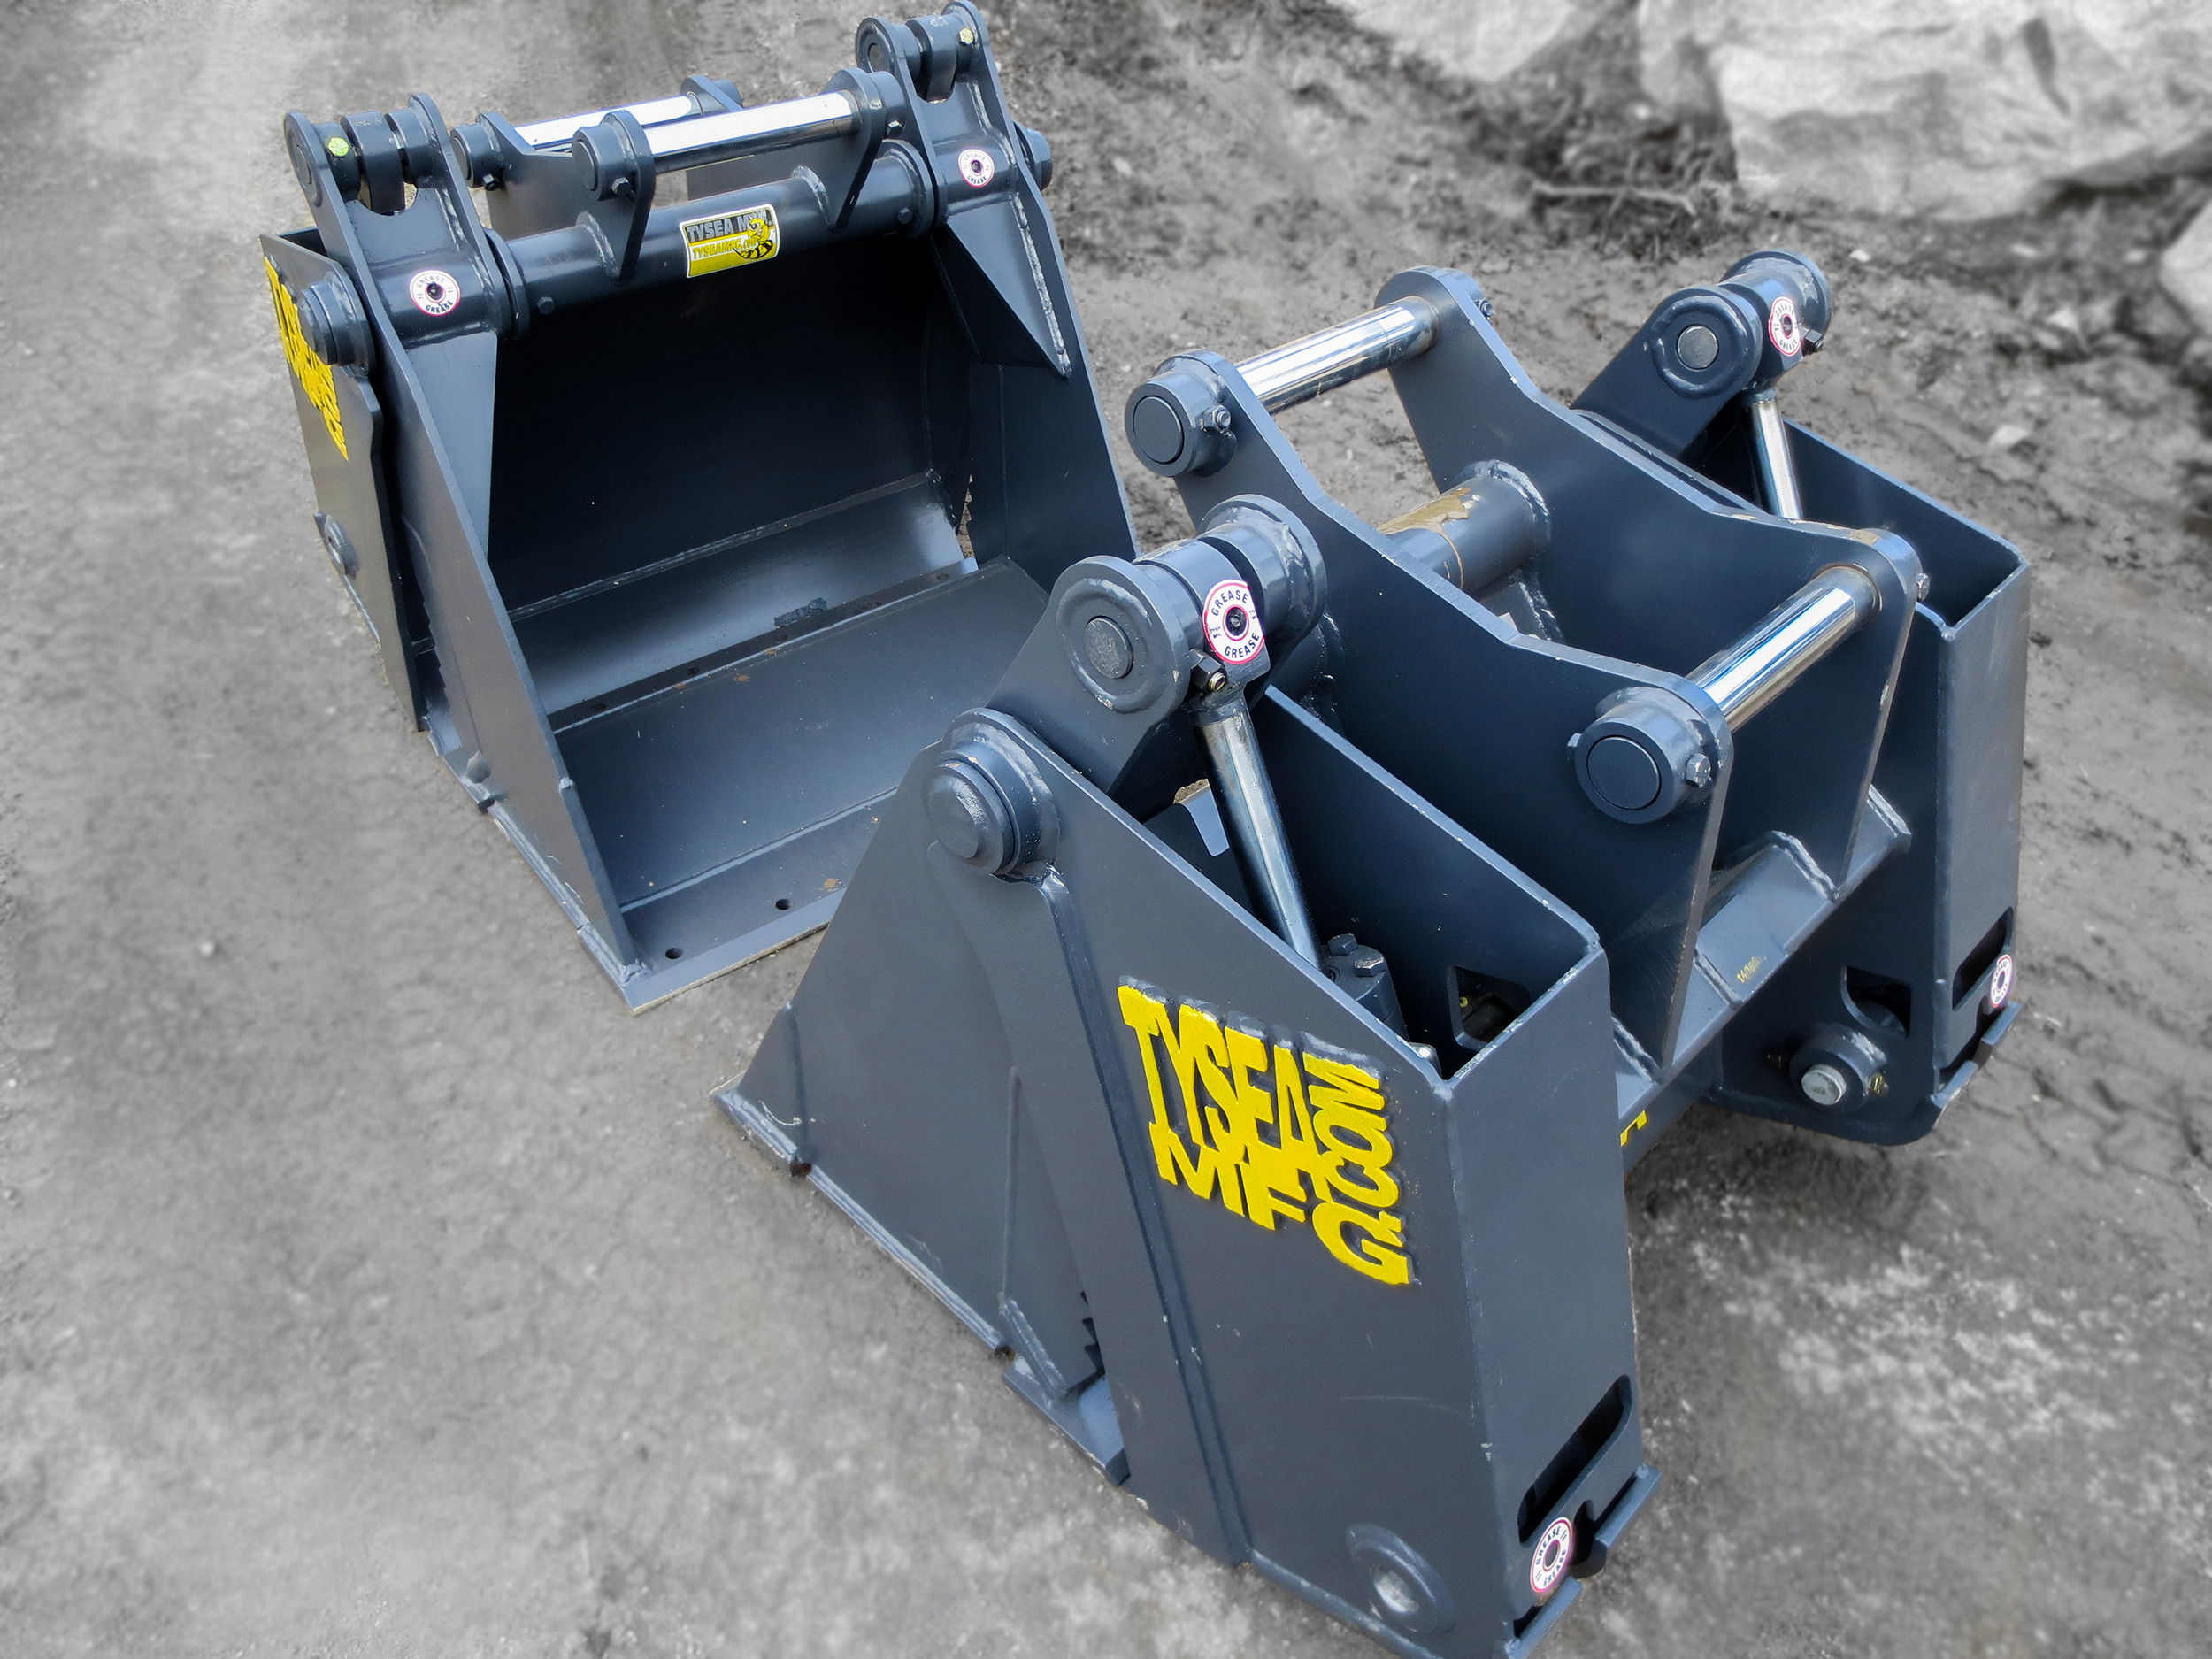 4-in-1 excavator grapple buckets used for grabbing, digging, cleaning, back blading and operational as a clamshell bucket.